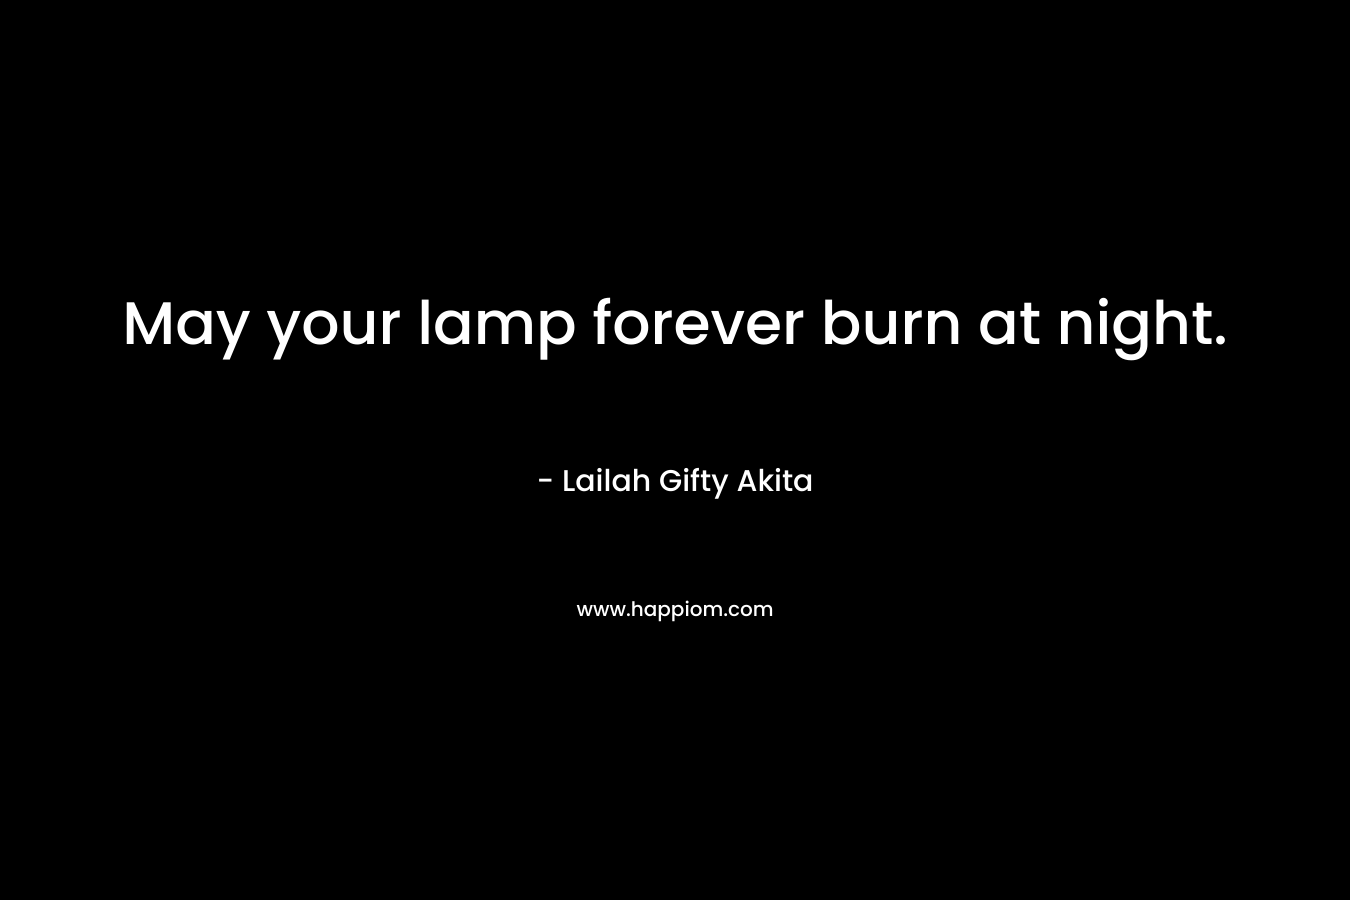 May your lamp forever burn at night.